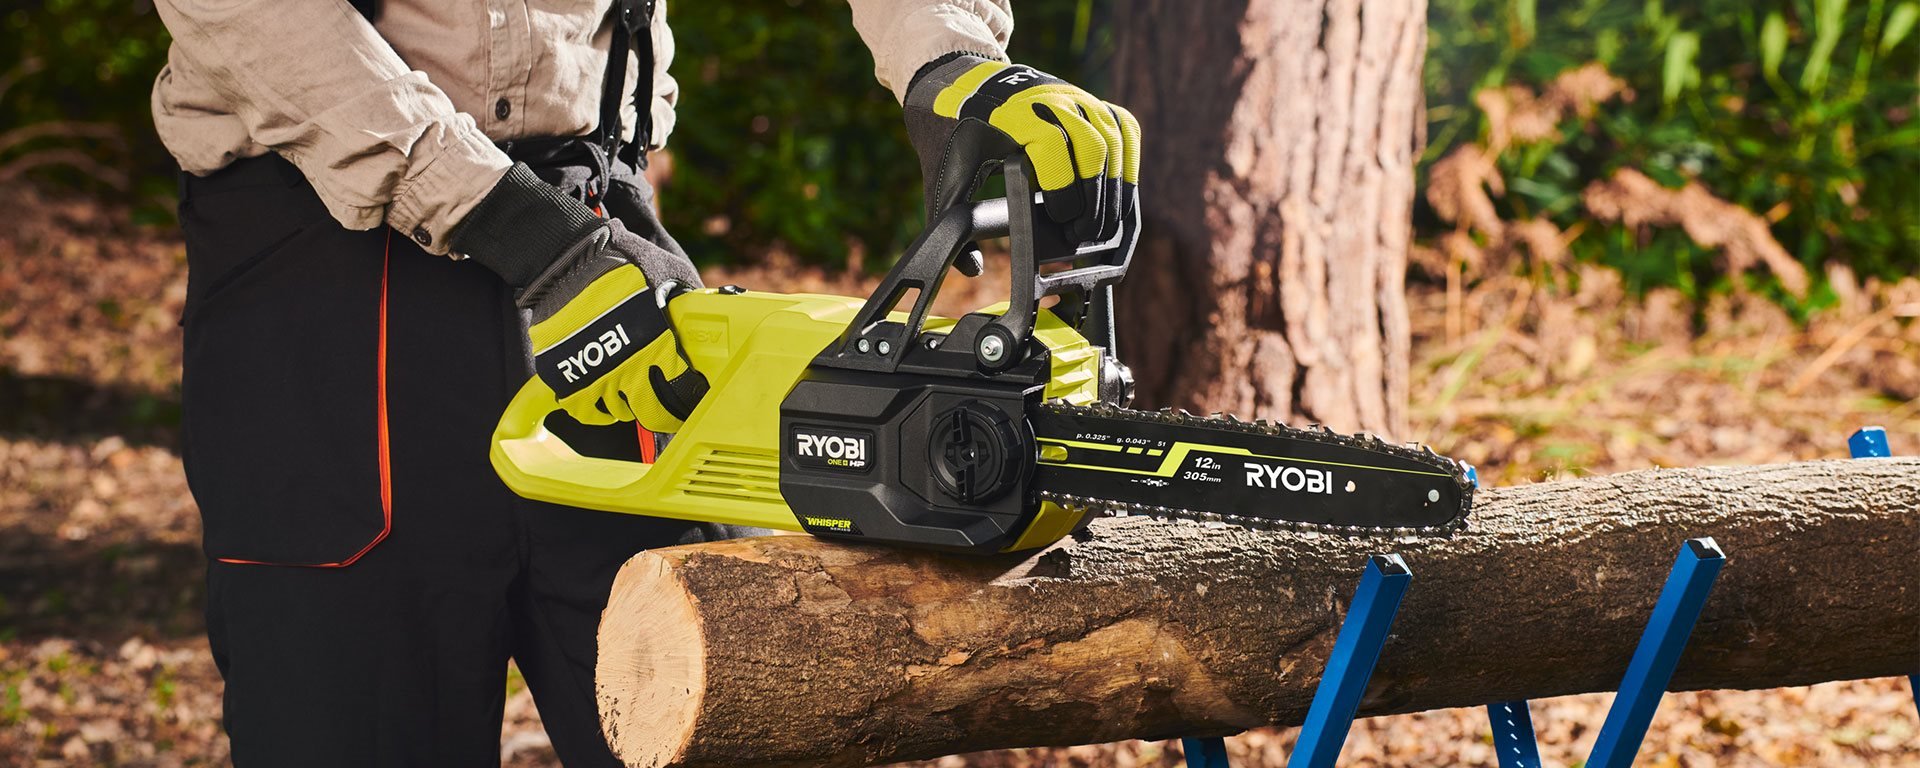 Advantages of a battery operated chainsaw